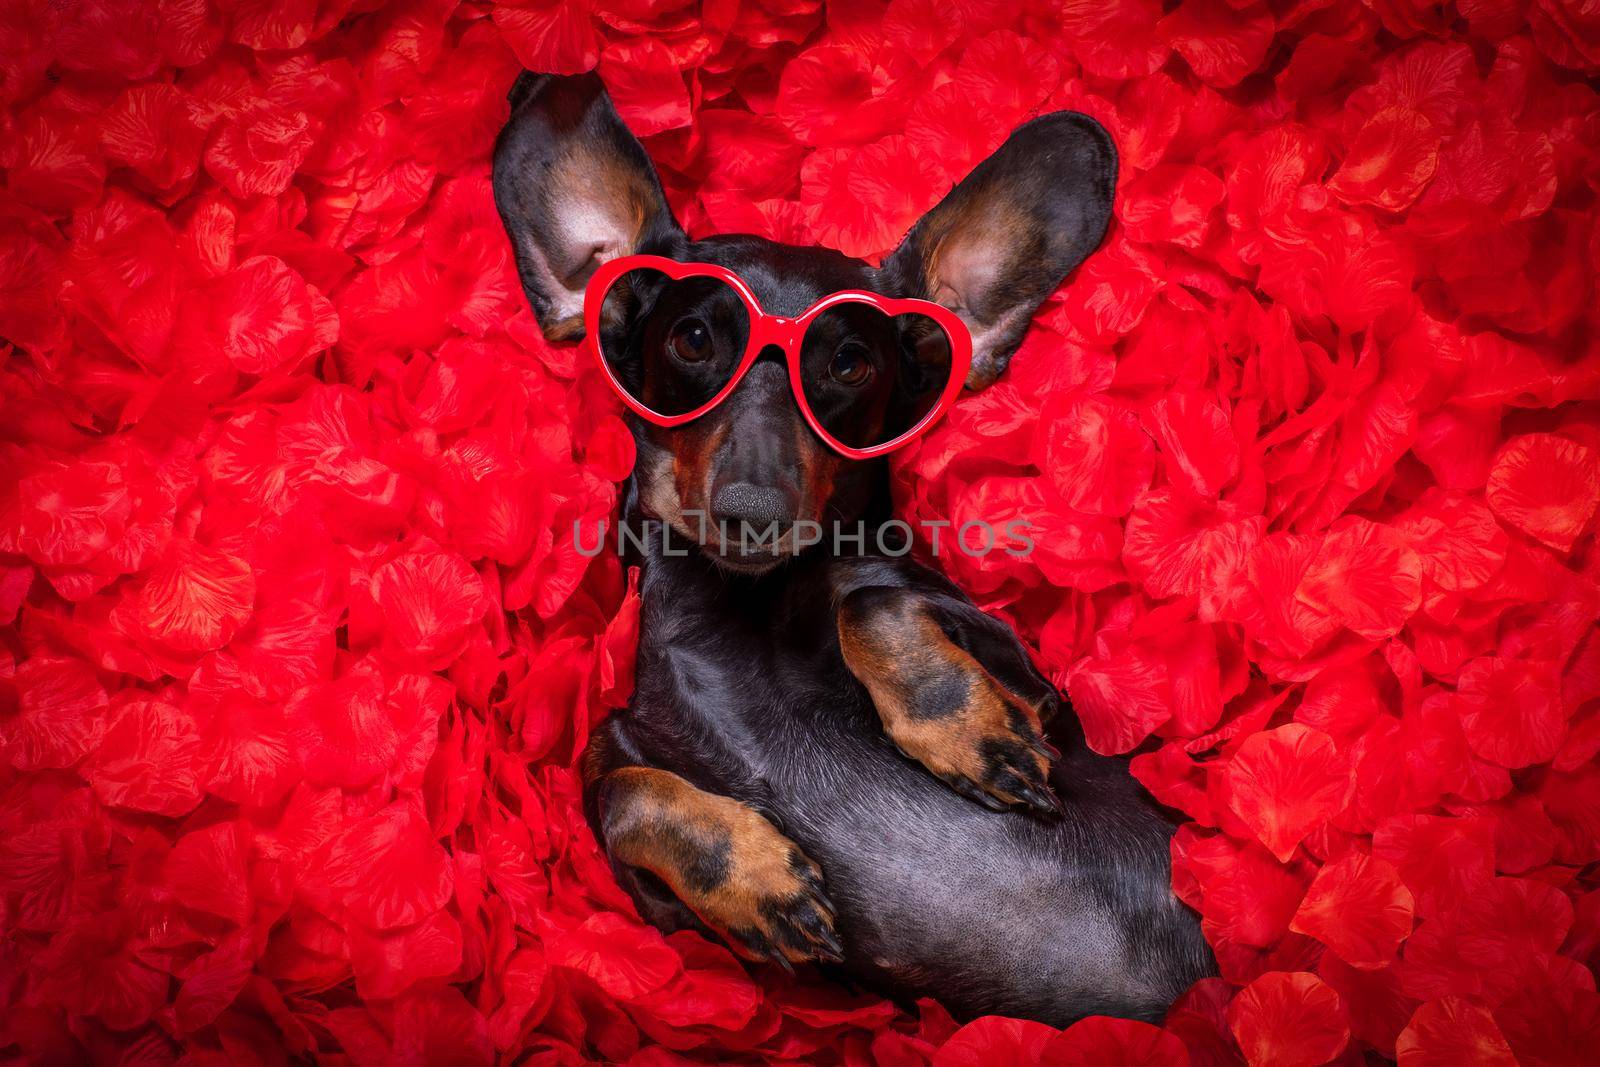 suasage  dachshund dog lying in bed full of red rose flower petals as background  , in love on valentines day and so cute with sunglasses